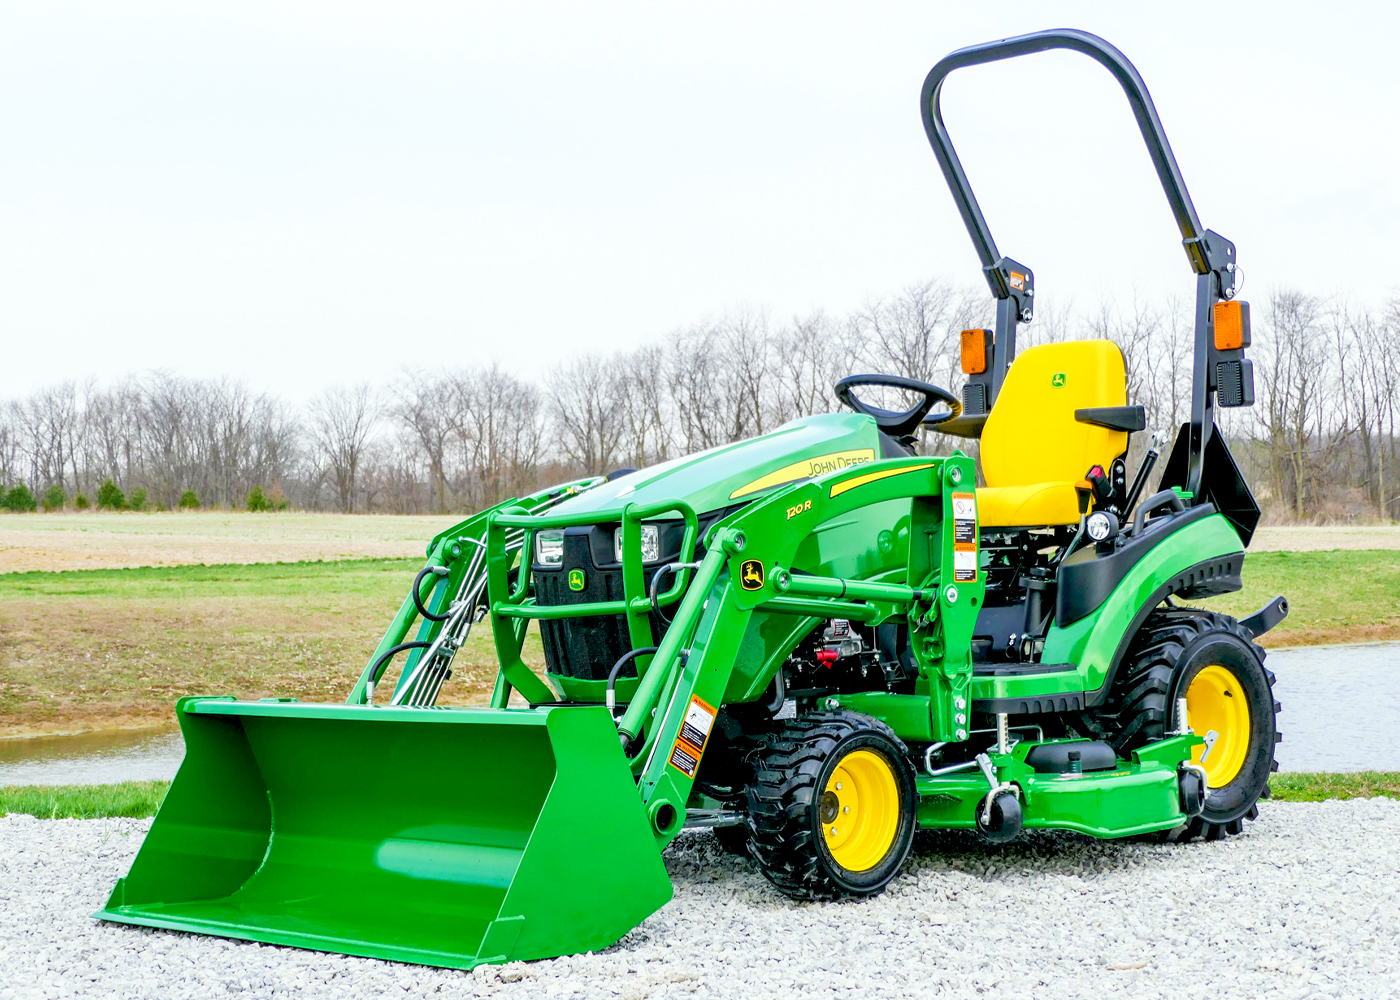 1025R Sub-Compact Utility Tractor